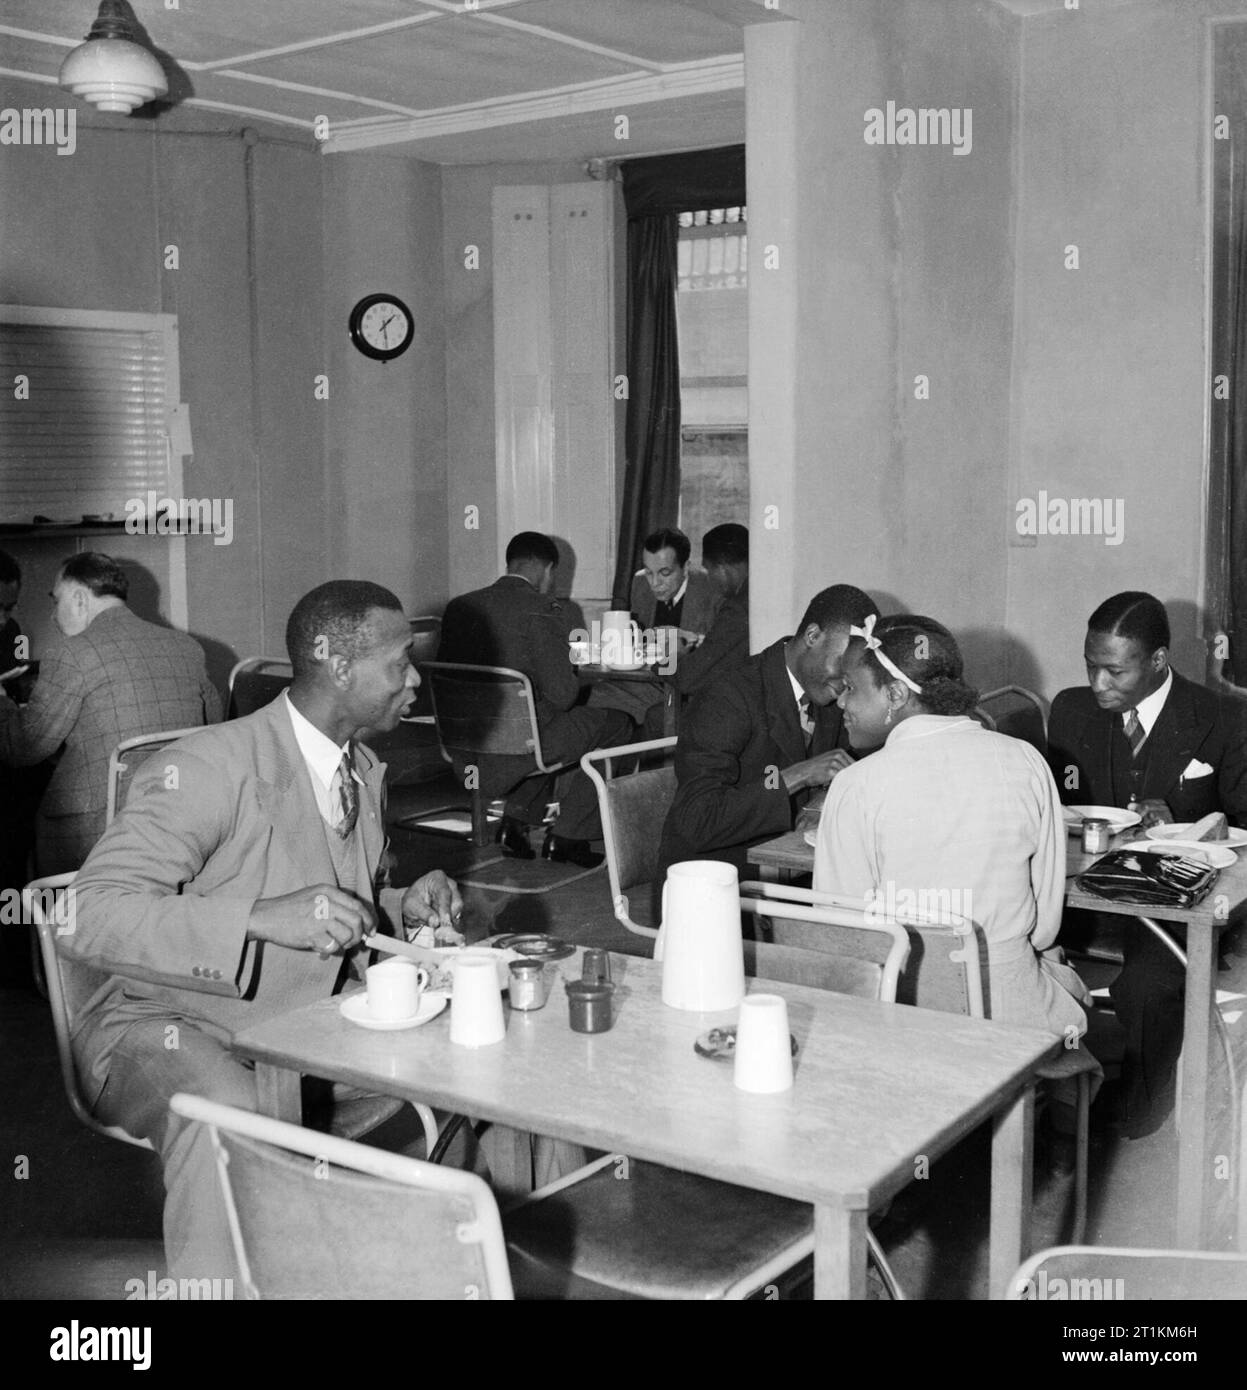 In the basement restaurant of the Colonial Centre at 17 Russell Square, London, civilians from Sierra Leone enjoy a meal, 1944. In the basement restaurant of the Colonial Centre at 17 Russell Square, men and women enjoy a meal. Mr P Thorpee (left) leans across to speak to Miss Rosamund Harding, sitting at a table with Mr D A Thomas and Mr C O E Cole. All four are from Sierra Leone: Mr Thorpee is the chief fire-officer back home, Miss Harding is a student teacher, and Mr Thomas and Mr Cole are law students. The original caption states that the restaurant is painted bright yellow! Stock Photo